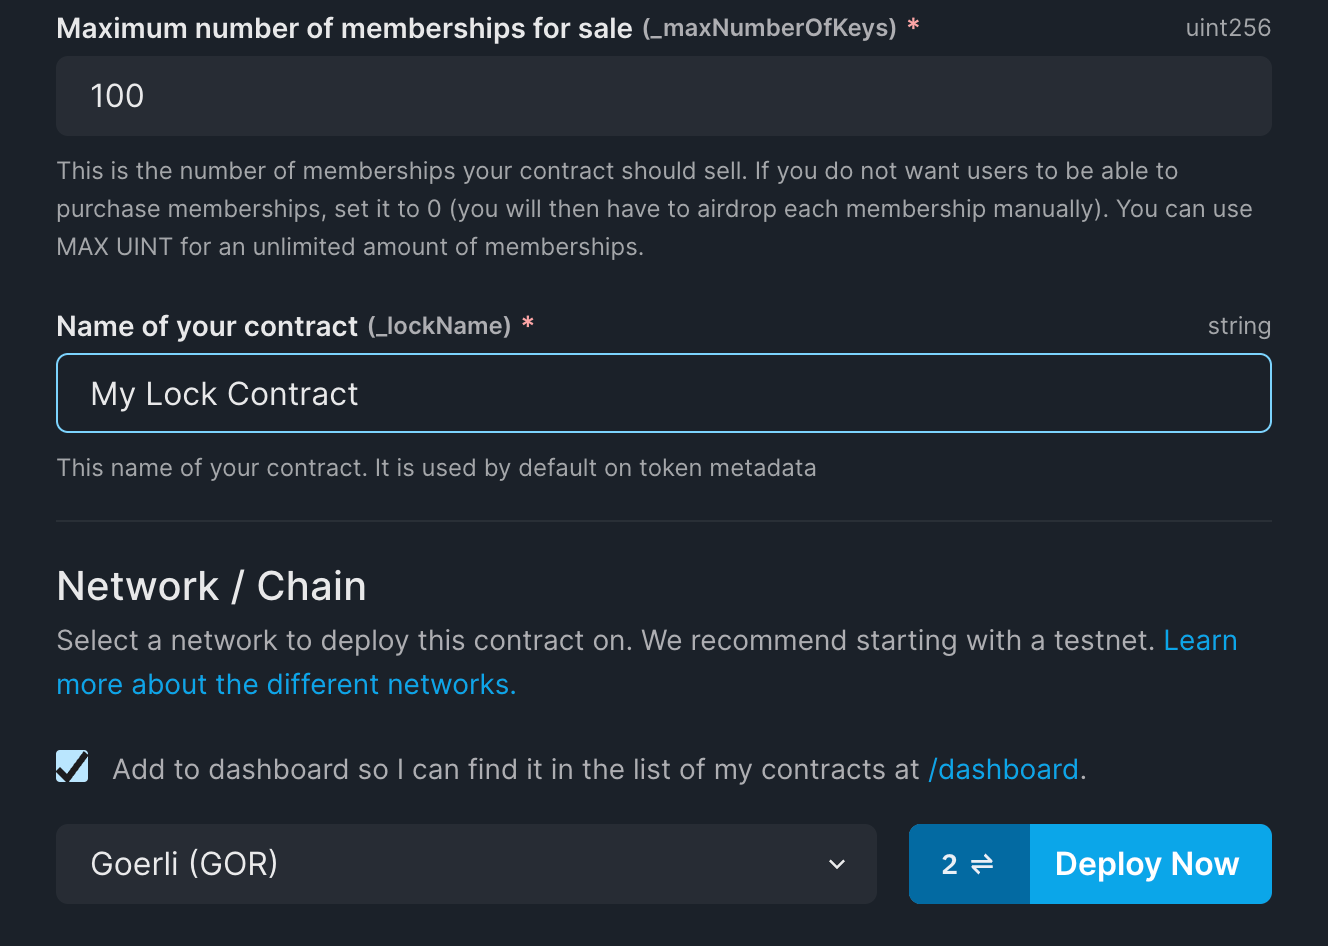 Add details of the contract and click Deploy